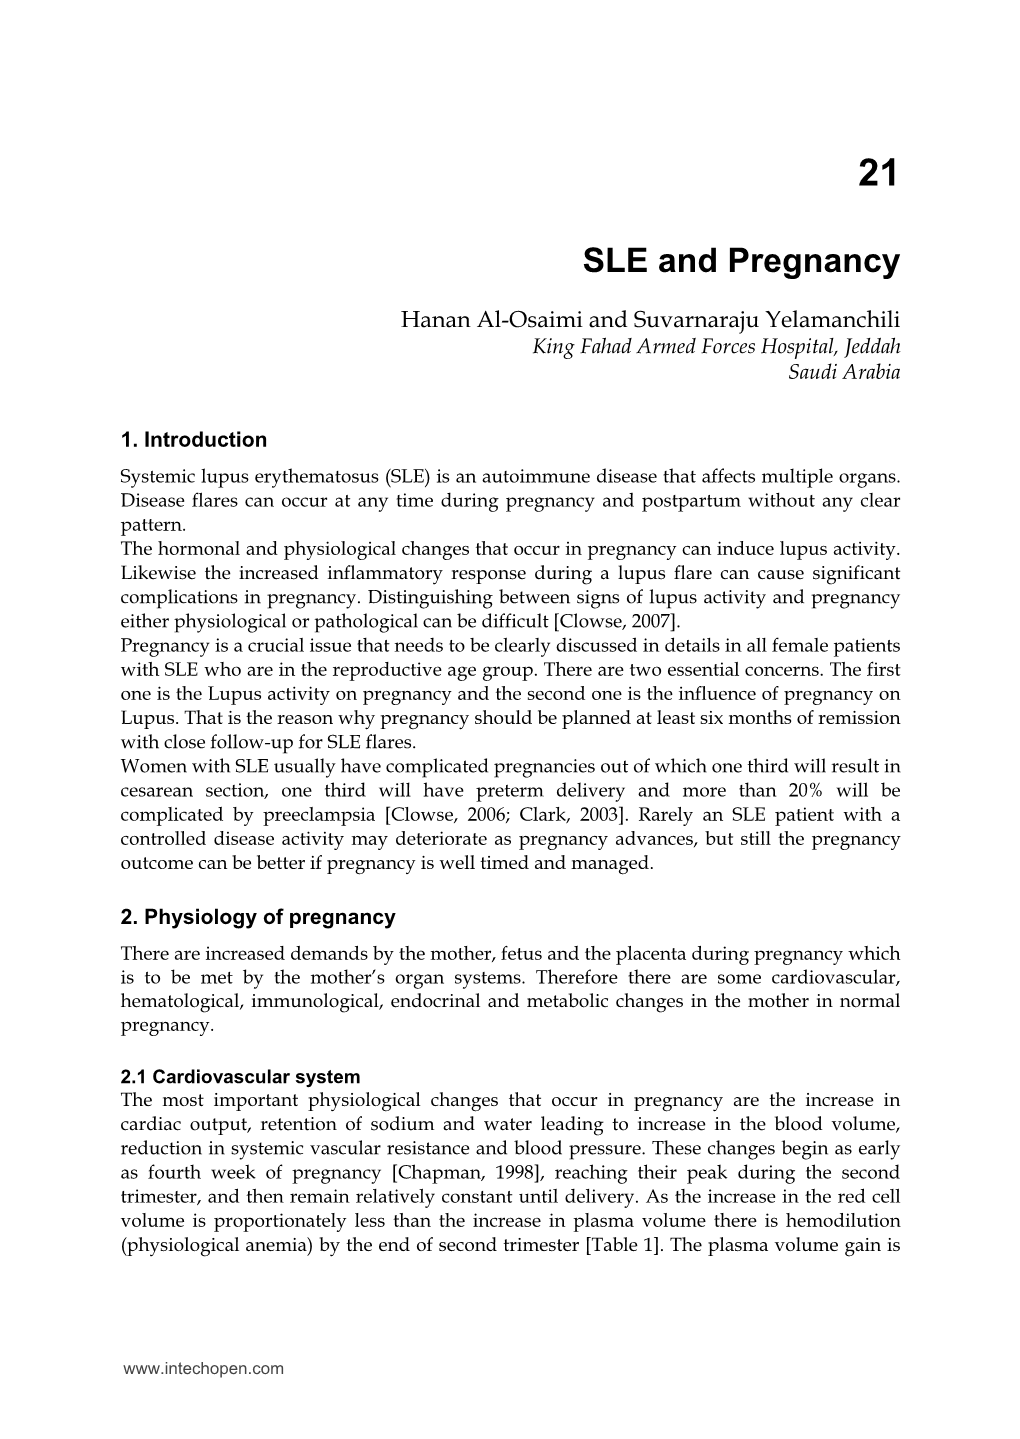 SLE and Pregnancy